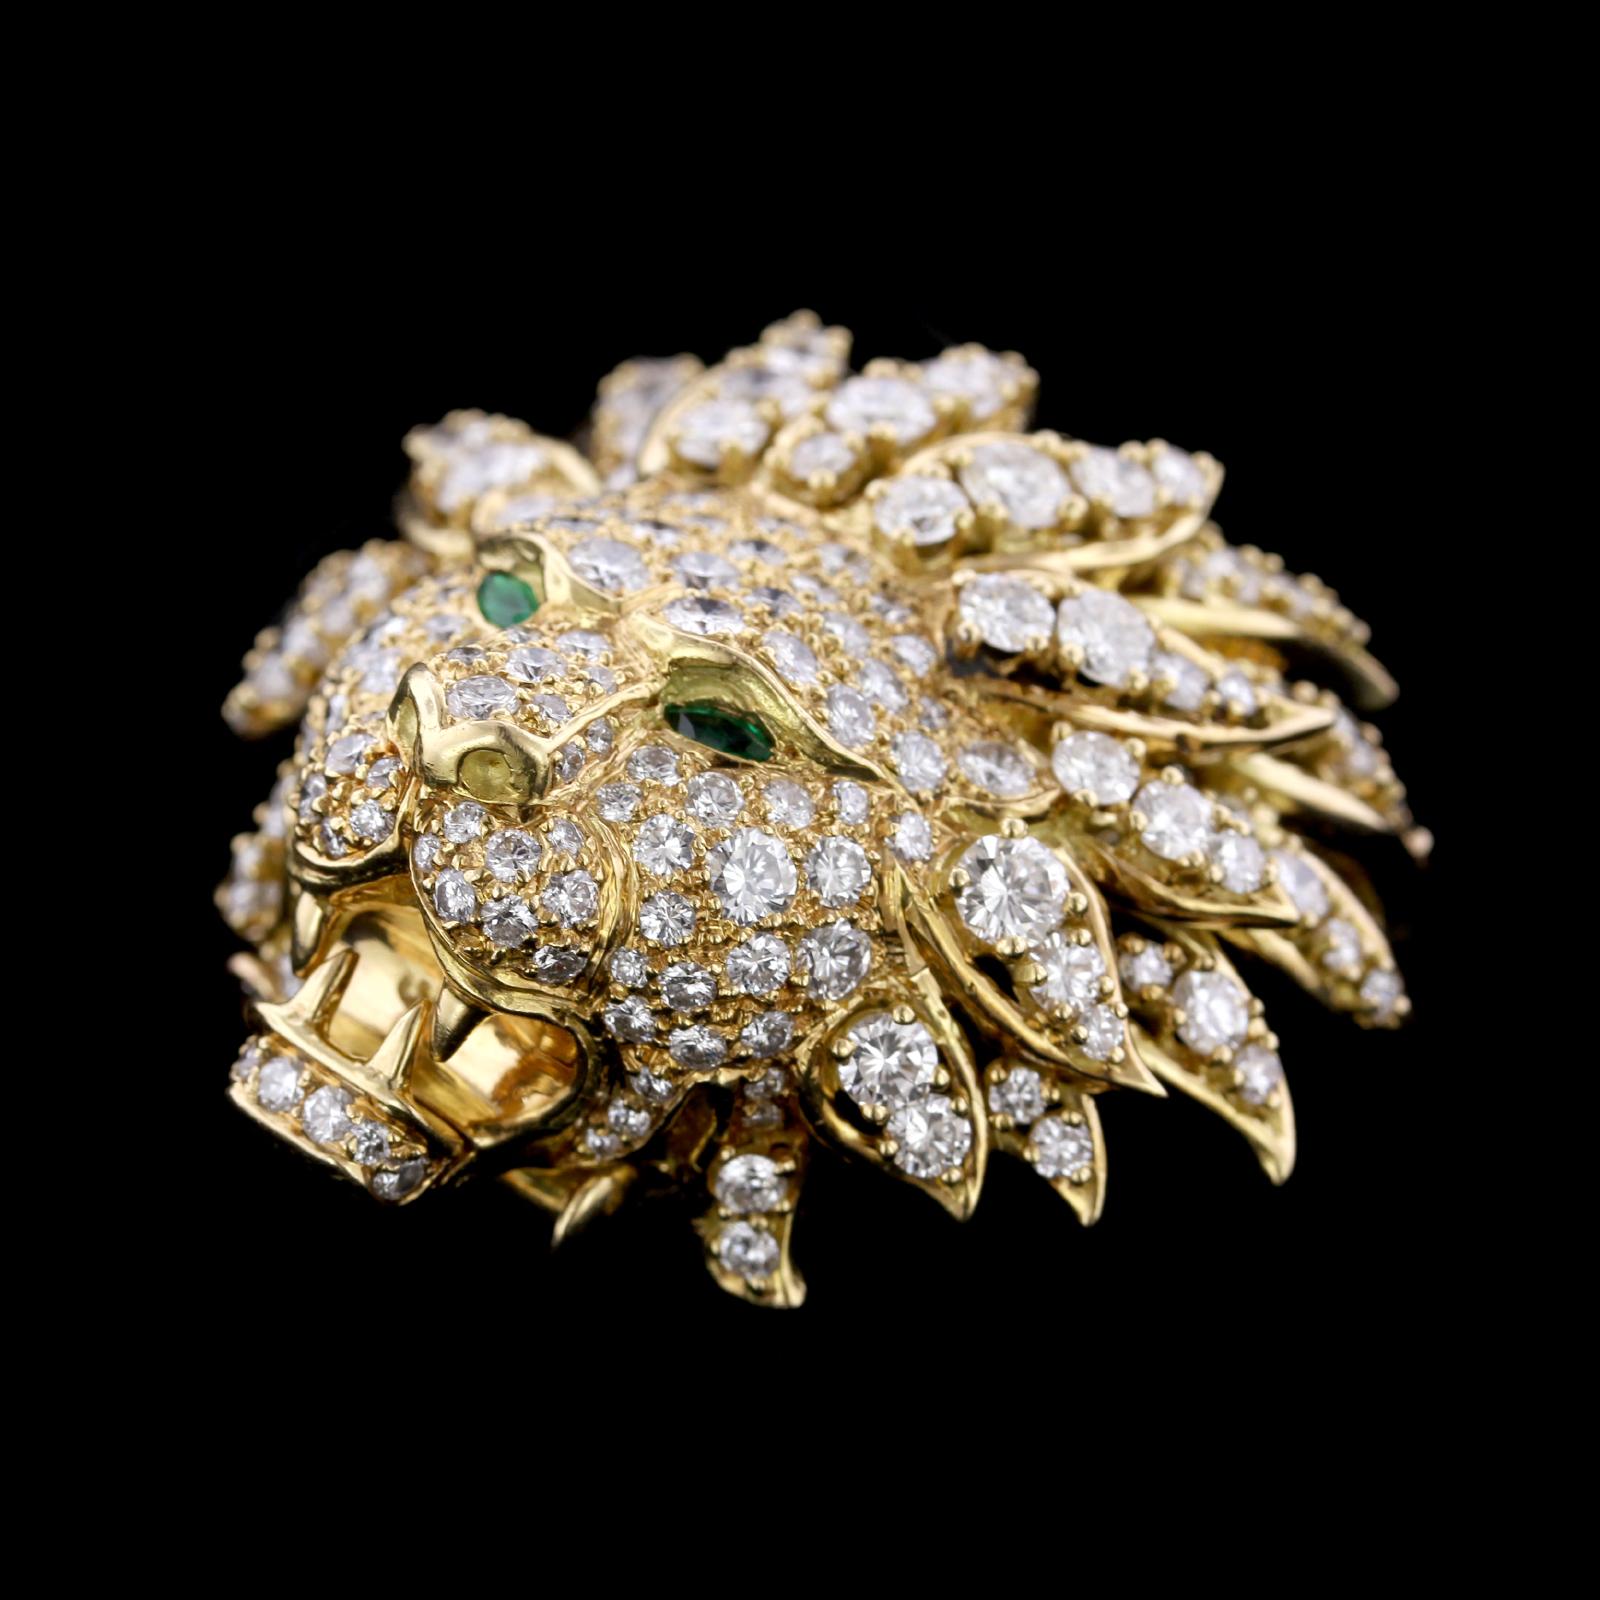 Van Cleef & Arpels 18K Yellow Gold Diamond Lion Brooch. The brooch is set with 164 round brilliant cut diamonds, approximate total wt. 6.00cts., G color, VS clarity, with two marquise cut emerald eyes, NY, numbered, length 1 3/4